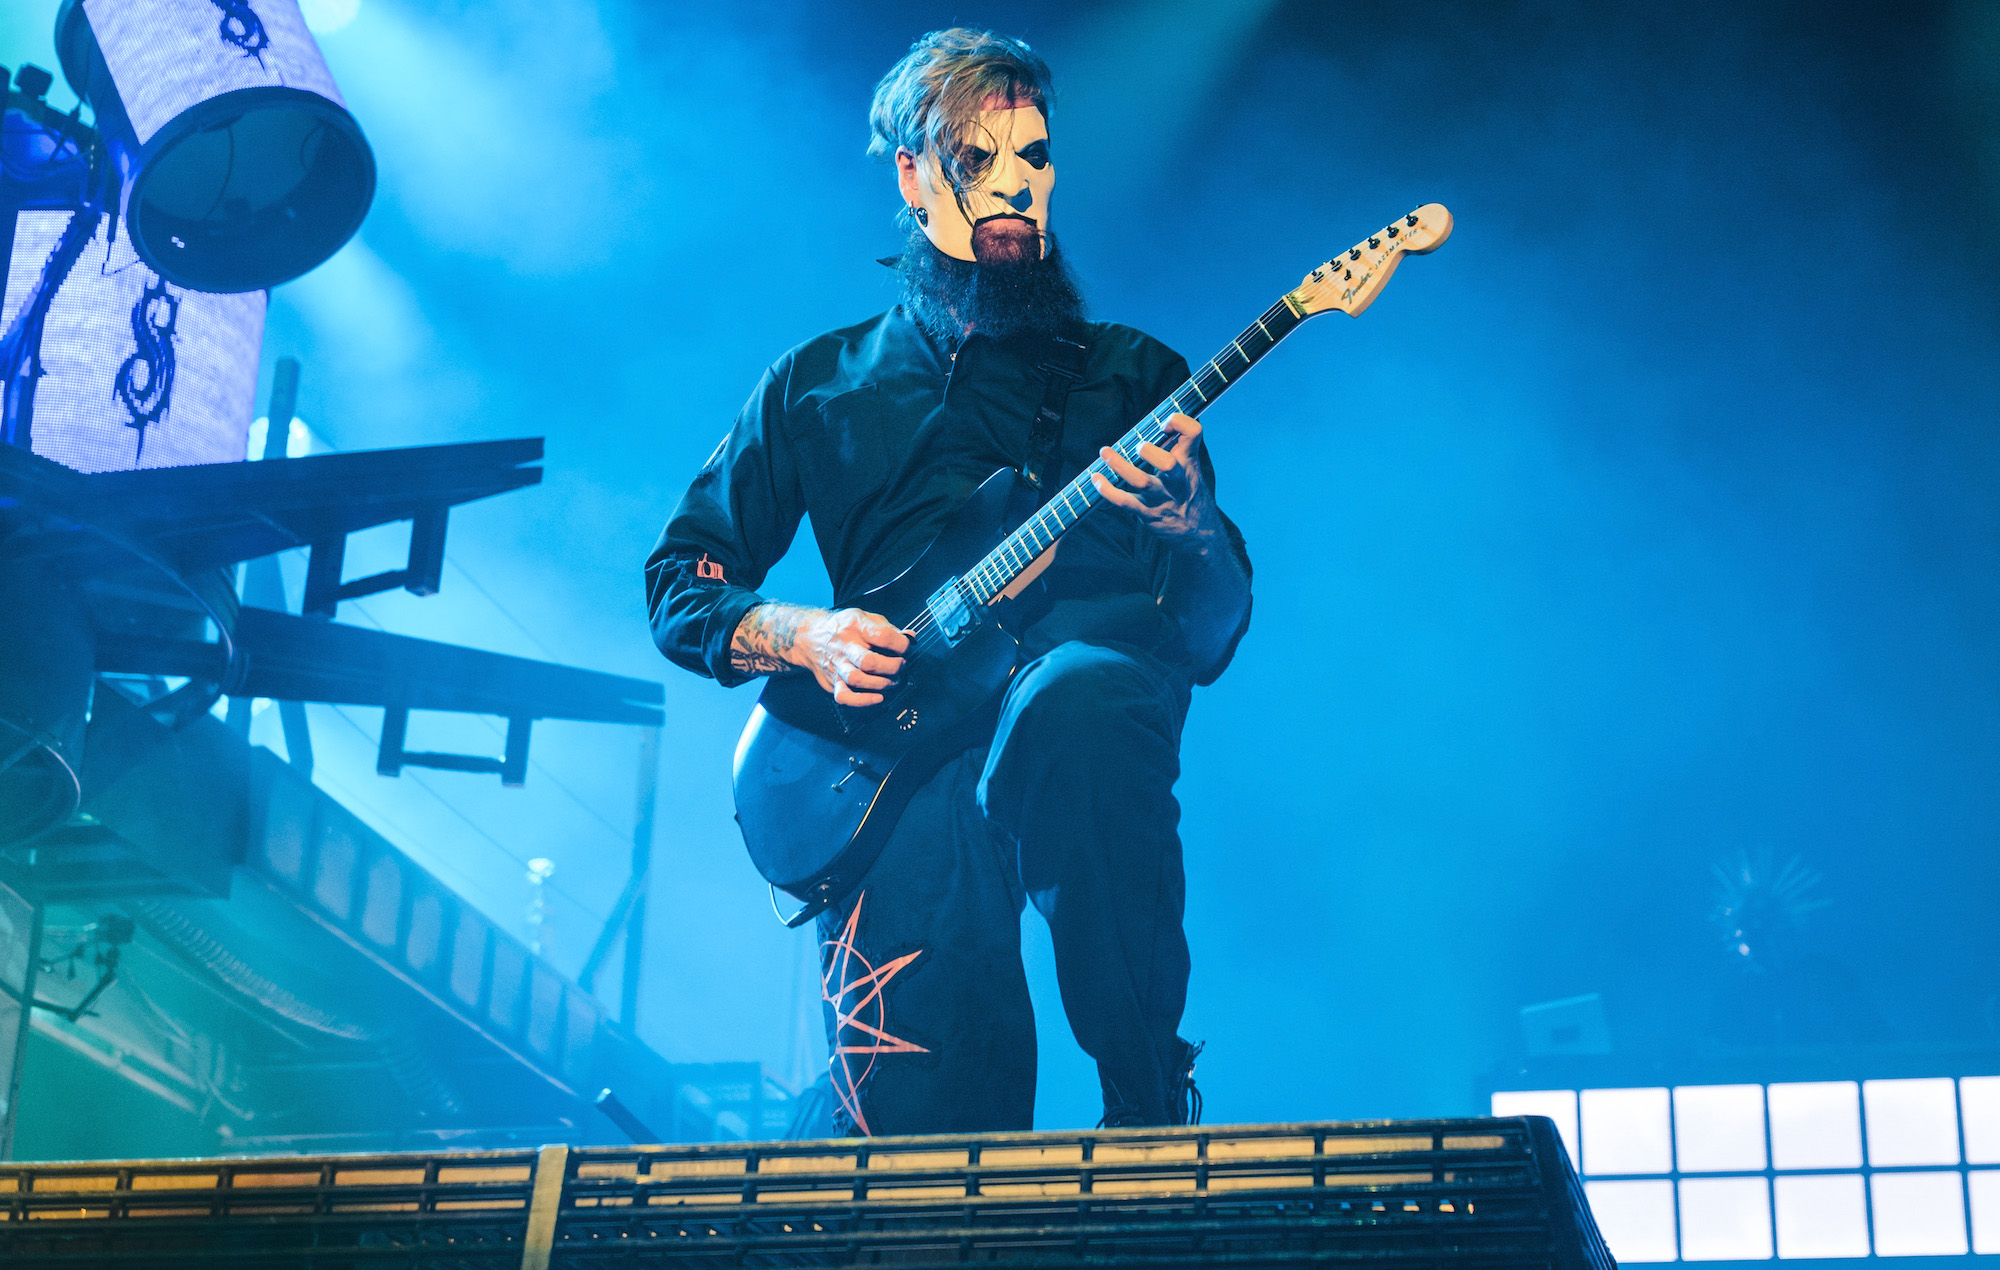 Jim Root Originally Turned Down The Chance To Join Slipknot Twice